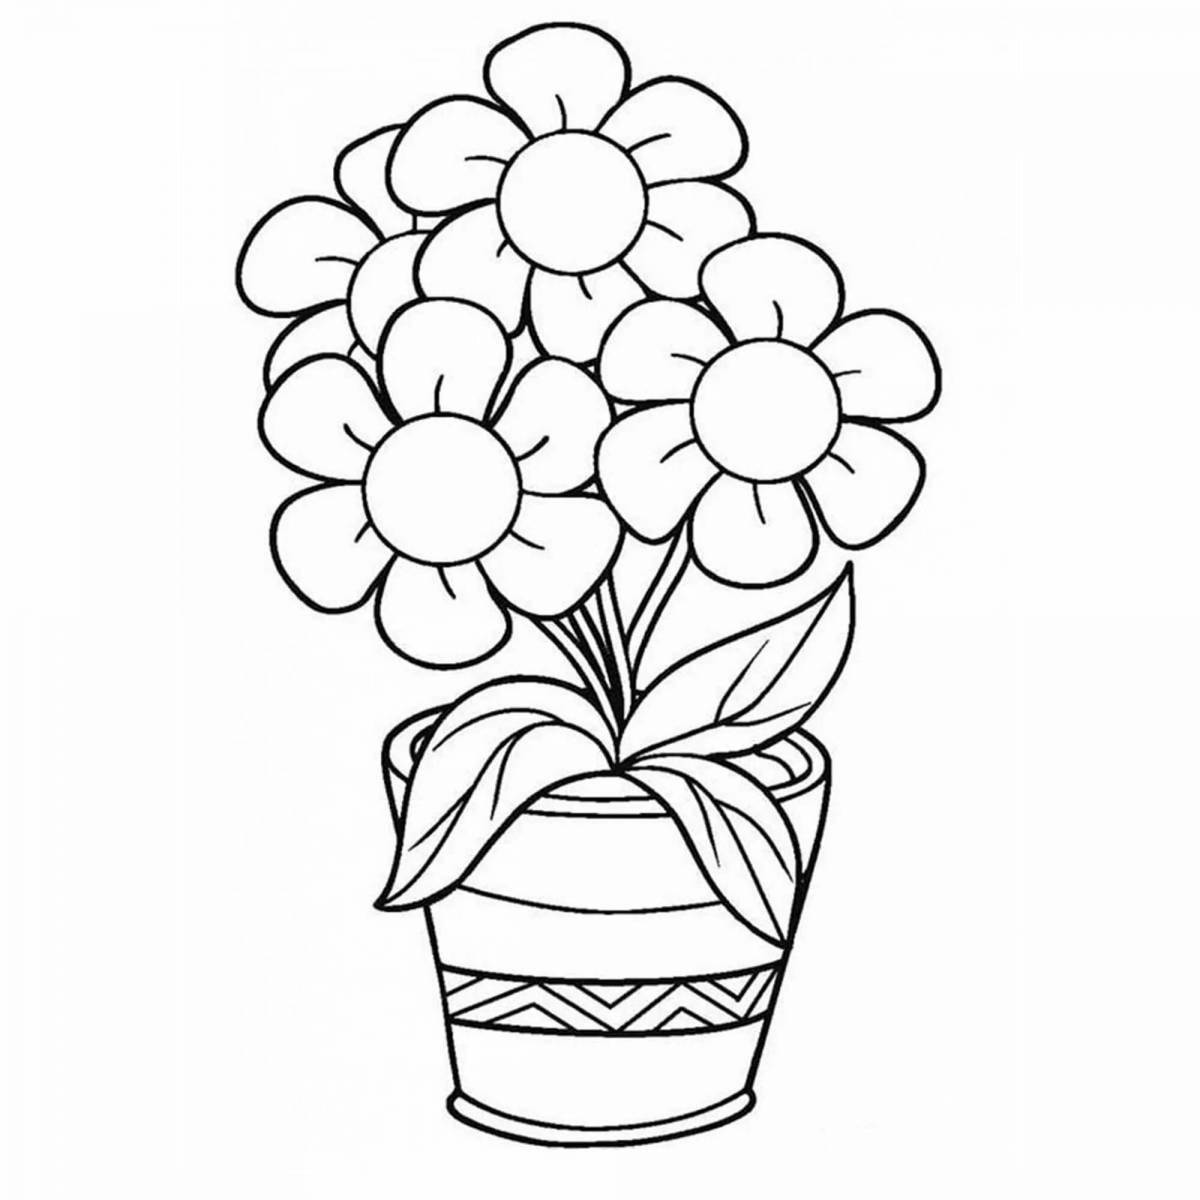 Coloring book shining bouquet in a vase